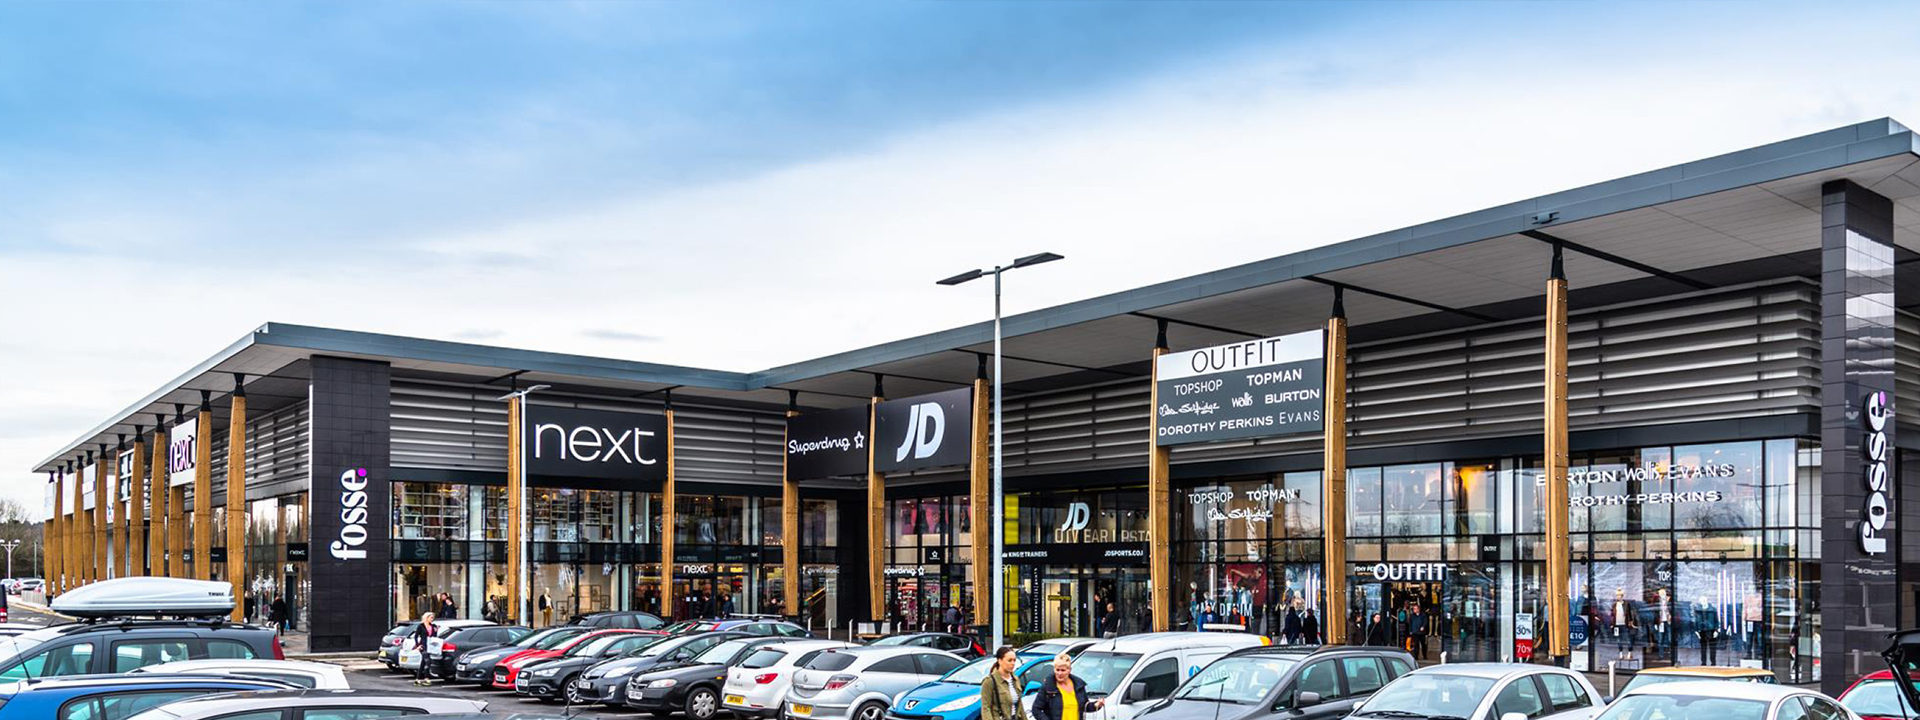 Planters, seating and cycle parking for Fosse Retail Park - News